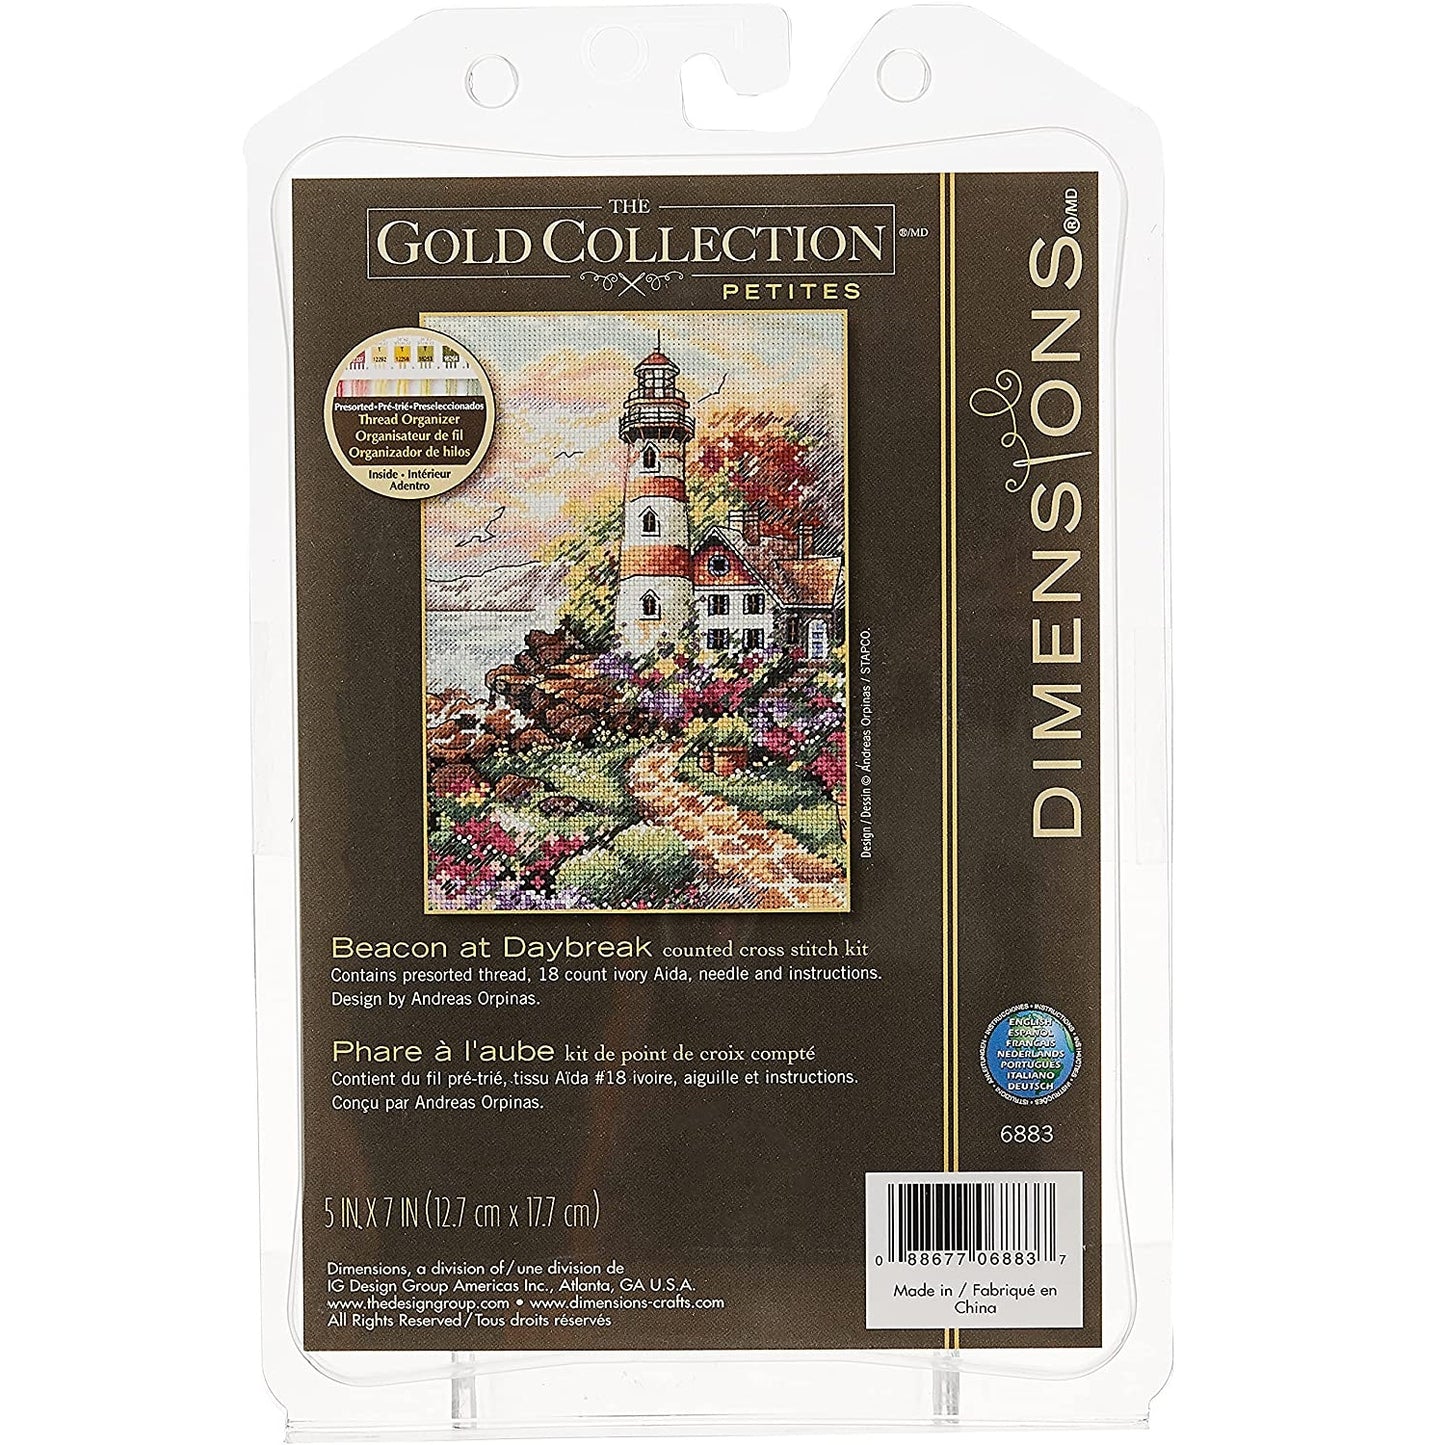 BEACON AT DAYBREAK, Counted Cross Stitch Kit, 18 count ivory Aida, DIMENSIONS, Gold Collection (06883)